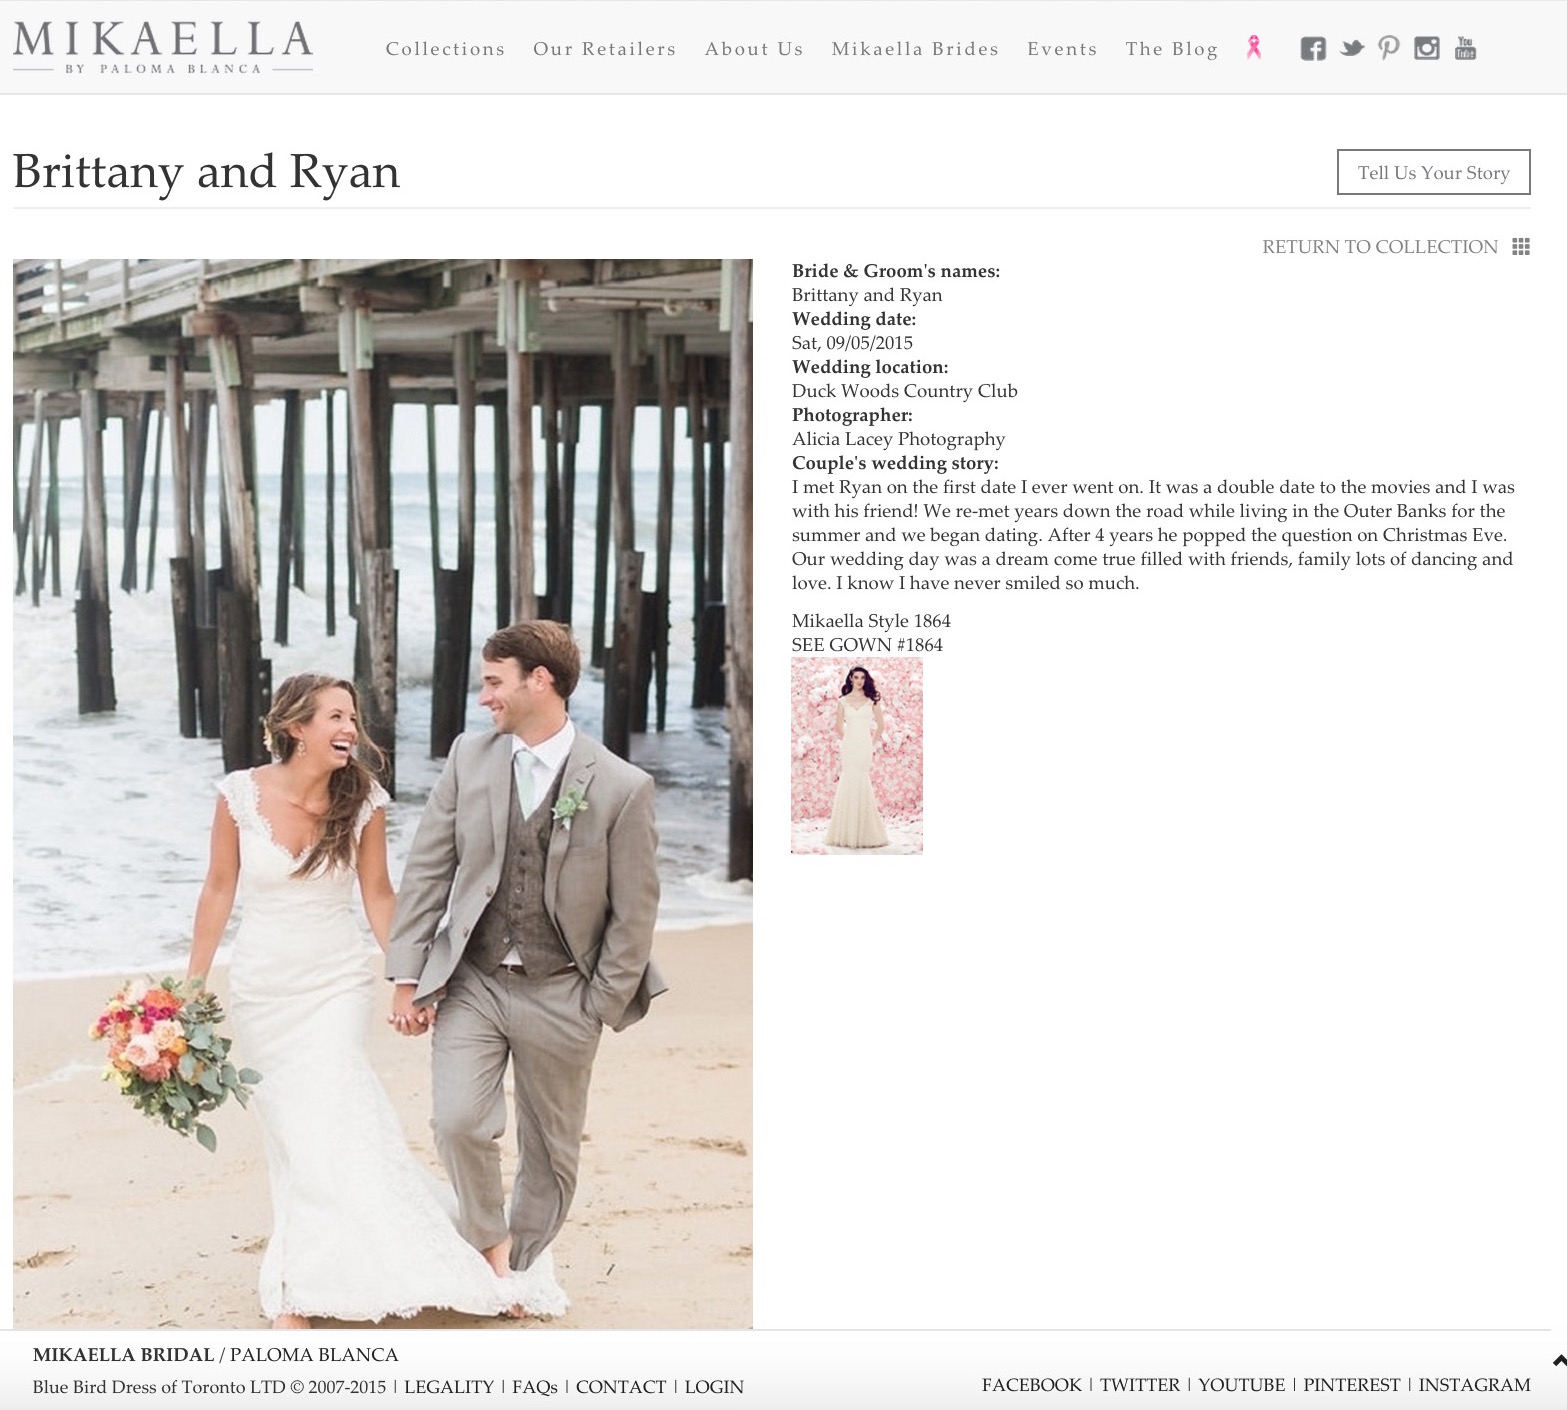 A fun feature on a wedding dress designer's website, Mikaella Brides, from an oceanside wedding in the Outer Banks.